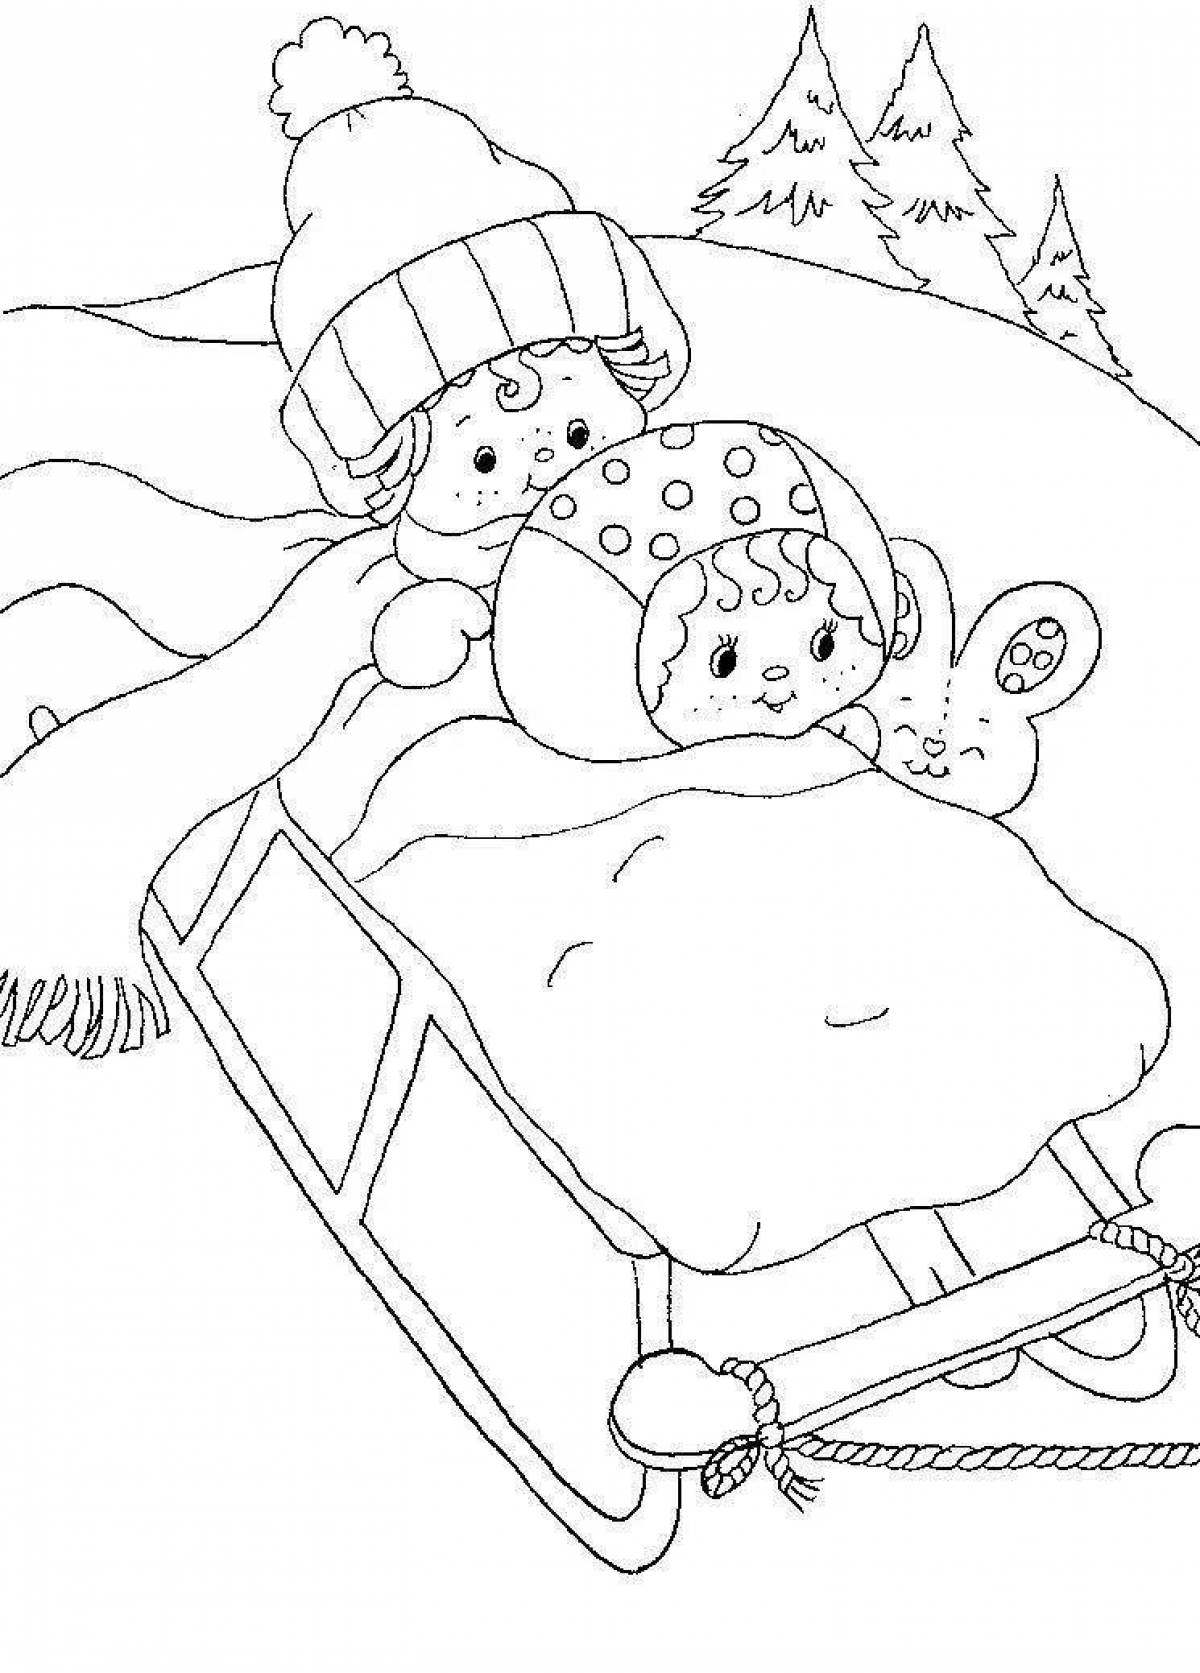 Animated child on a sleigh coloring book